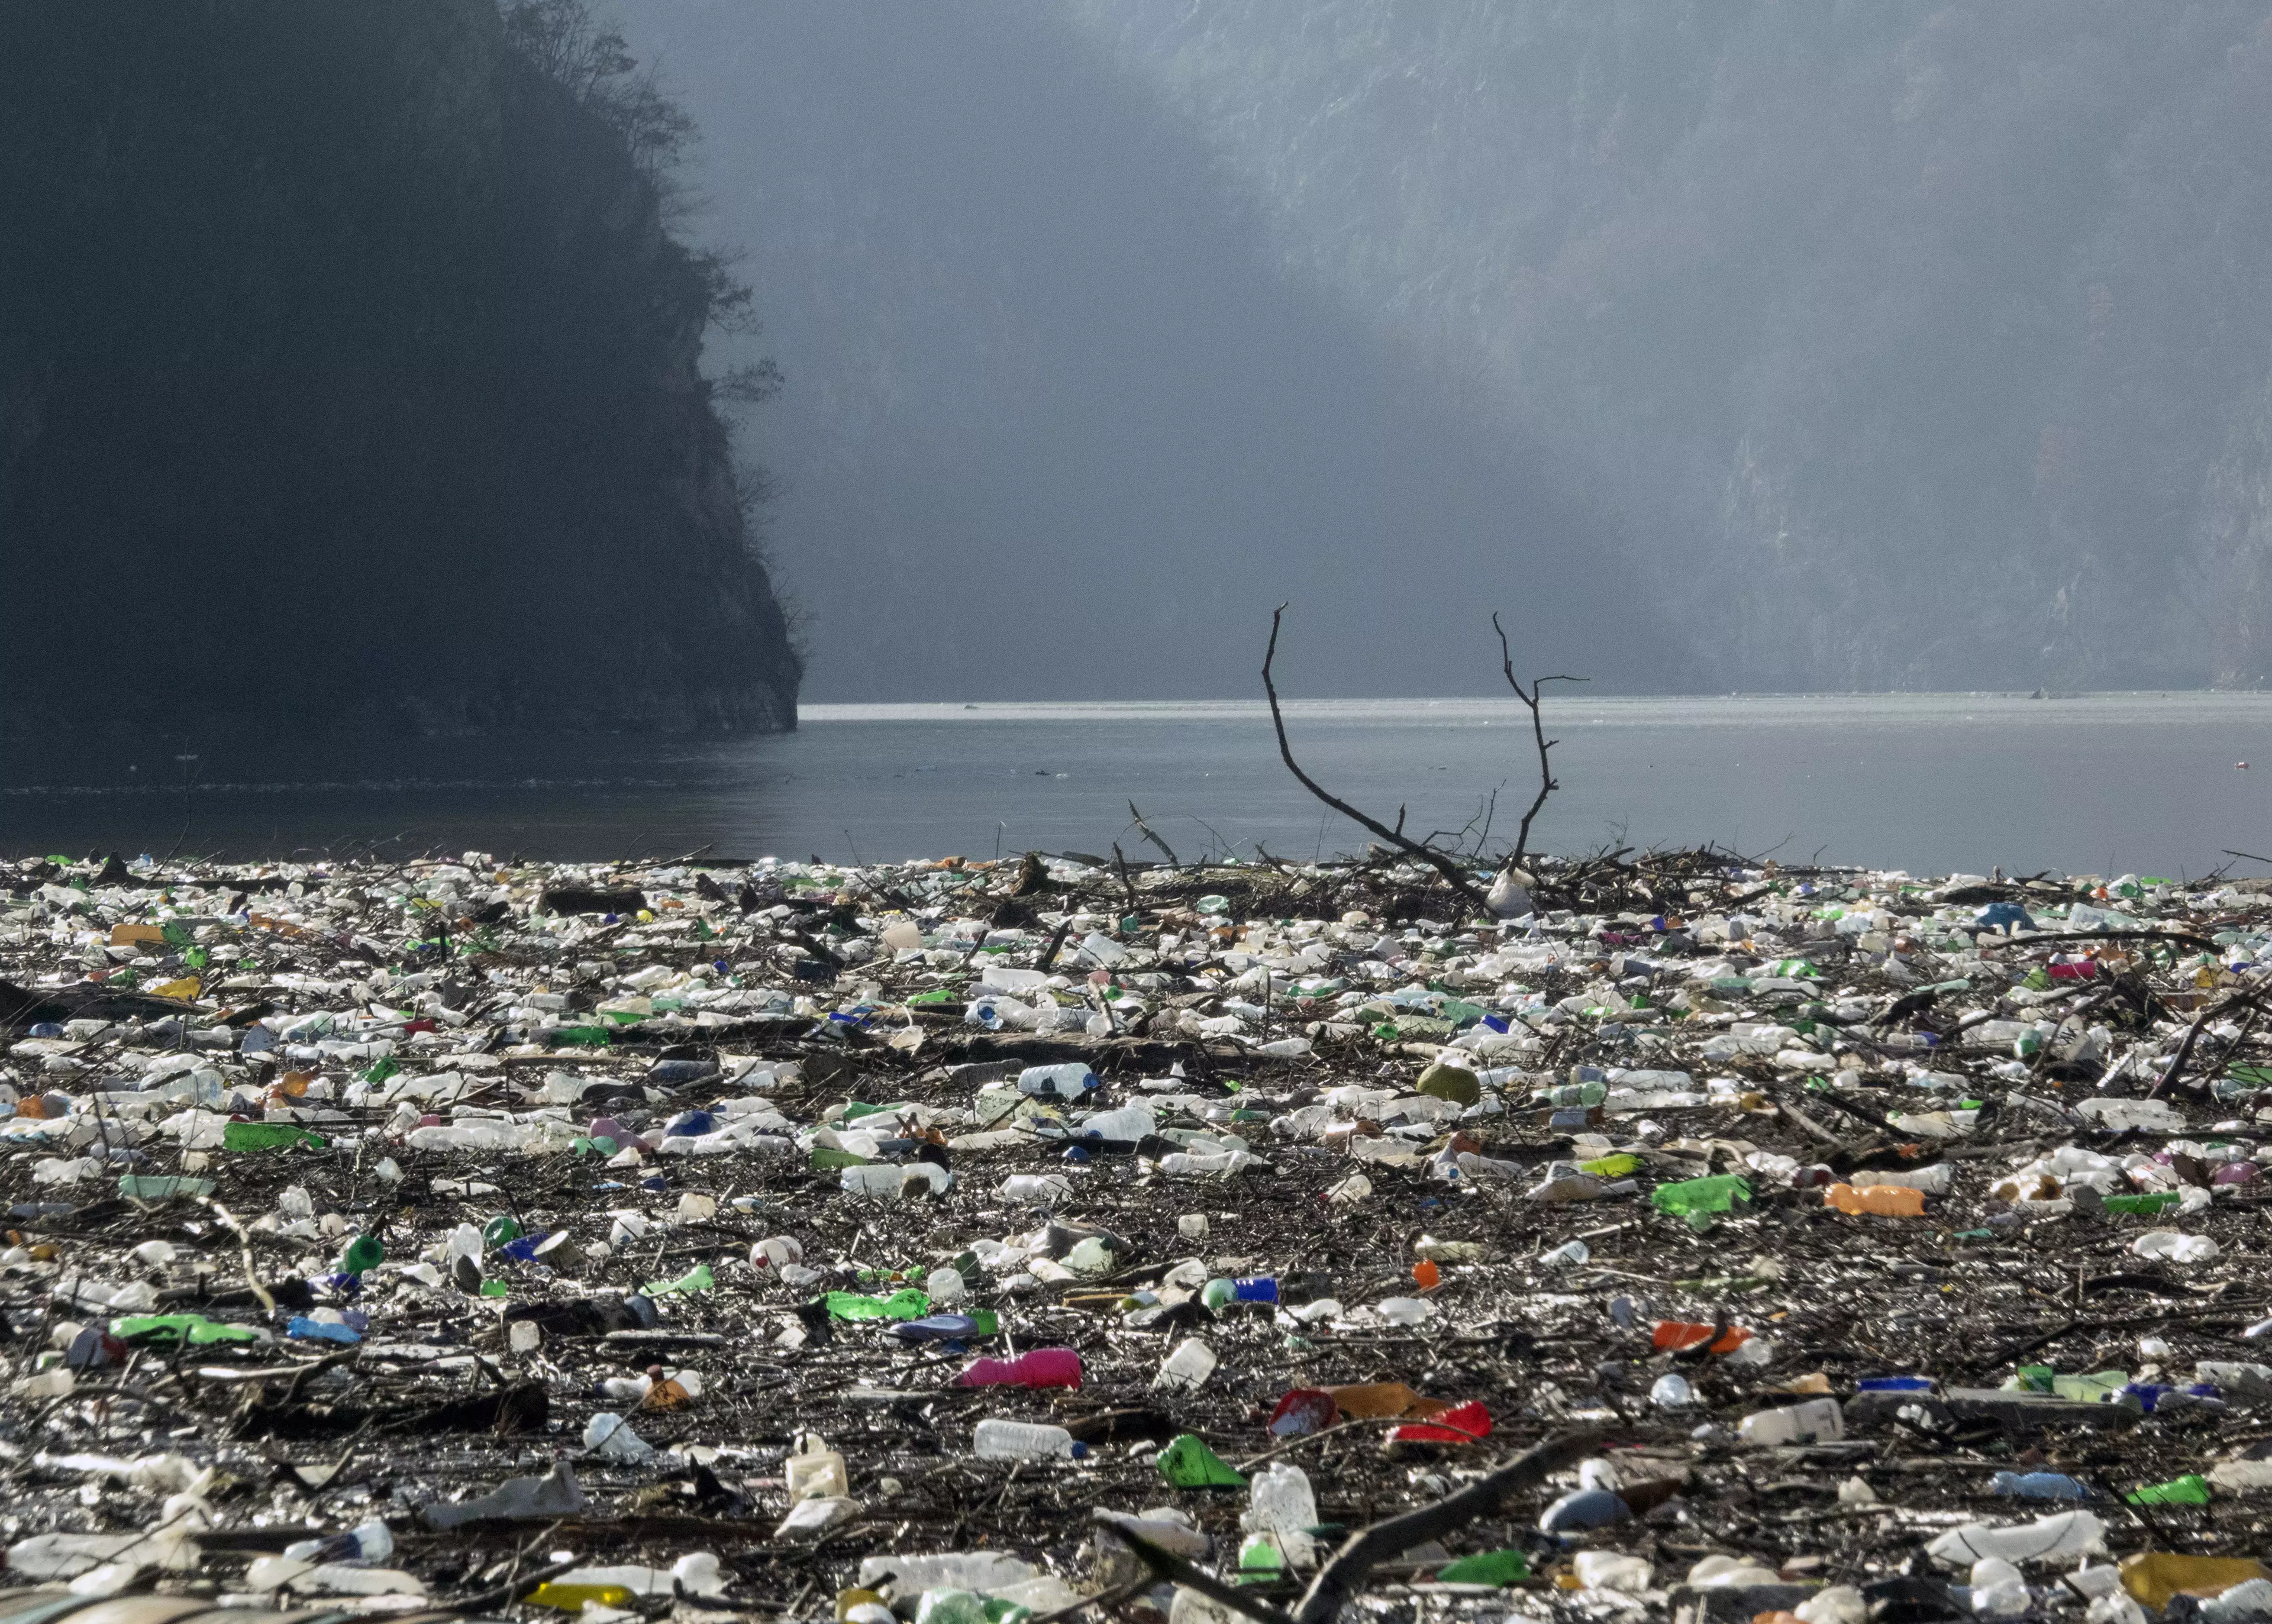 Plastic bottles, wooden planks, rusty barrels and other garbage clogging the Drina river near the eastern Bosnian town of Visegrad, Bosnia (